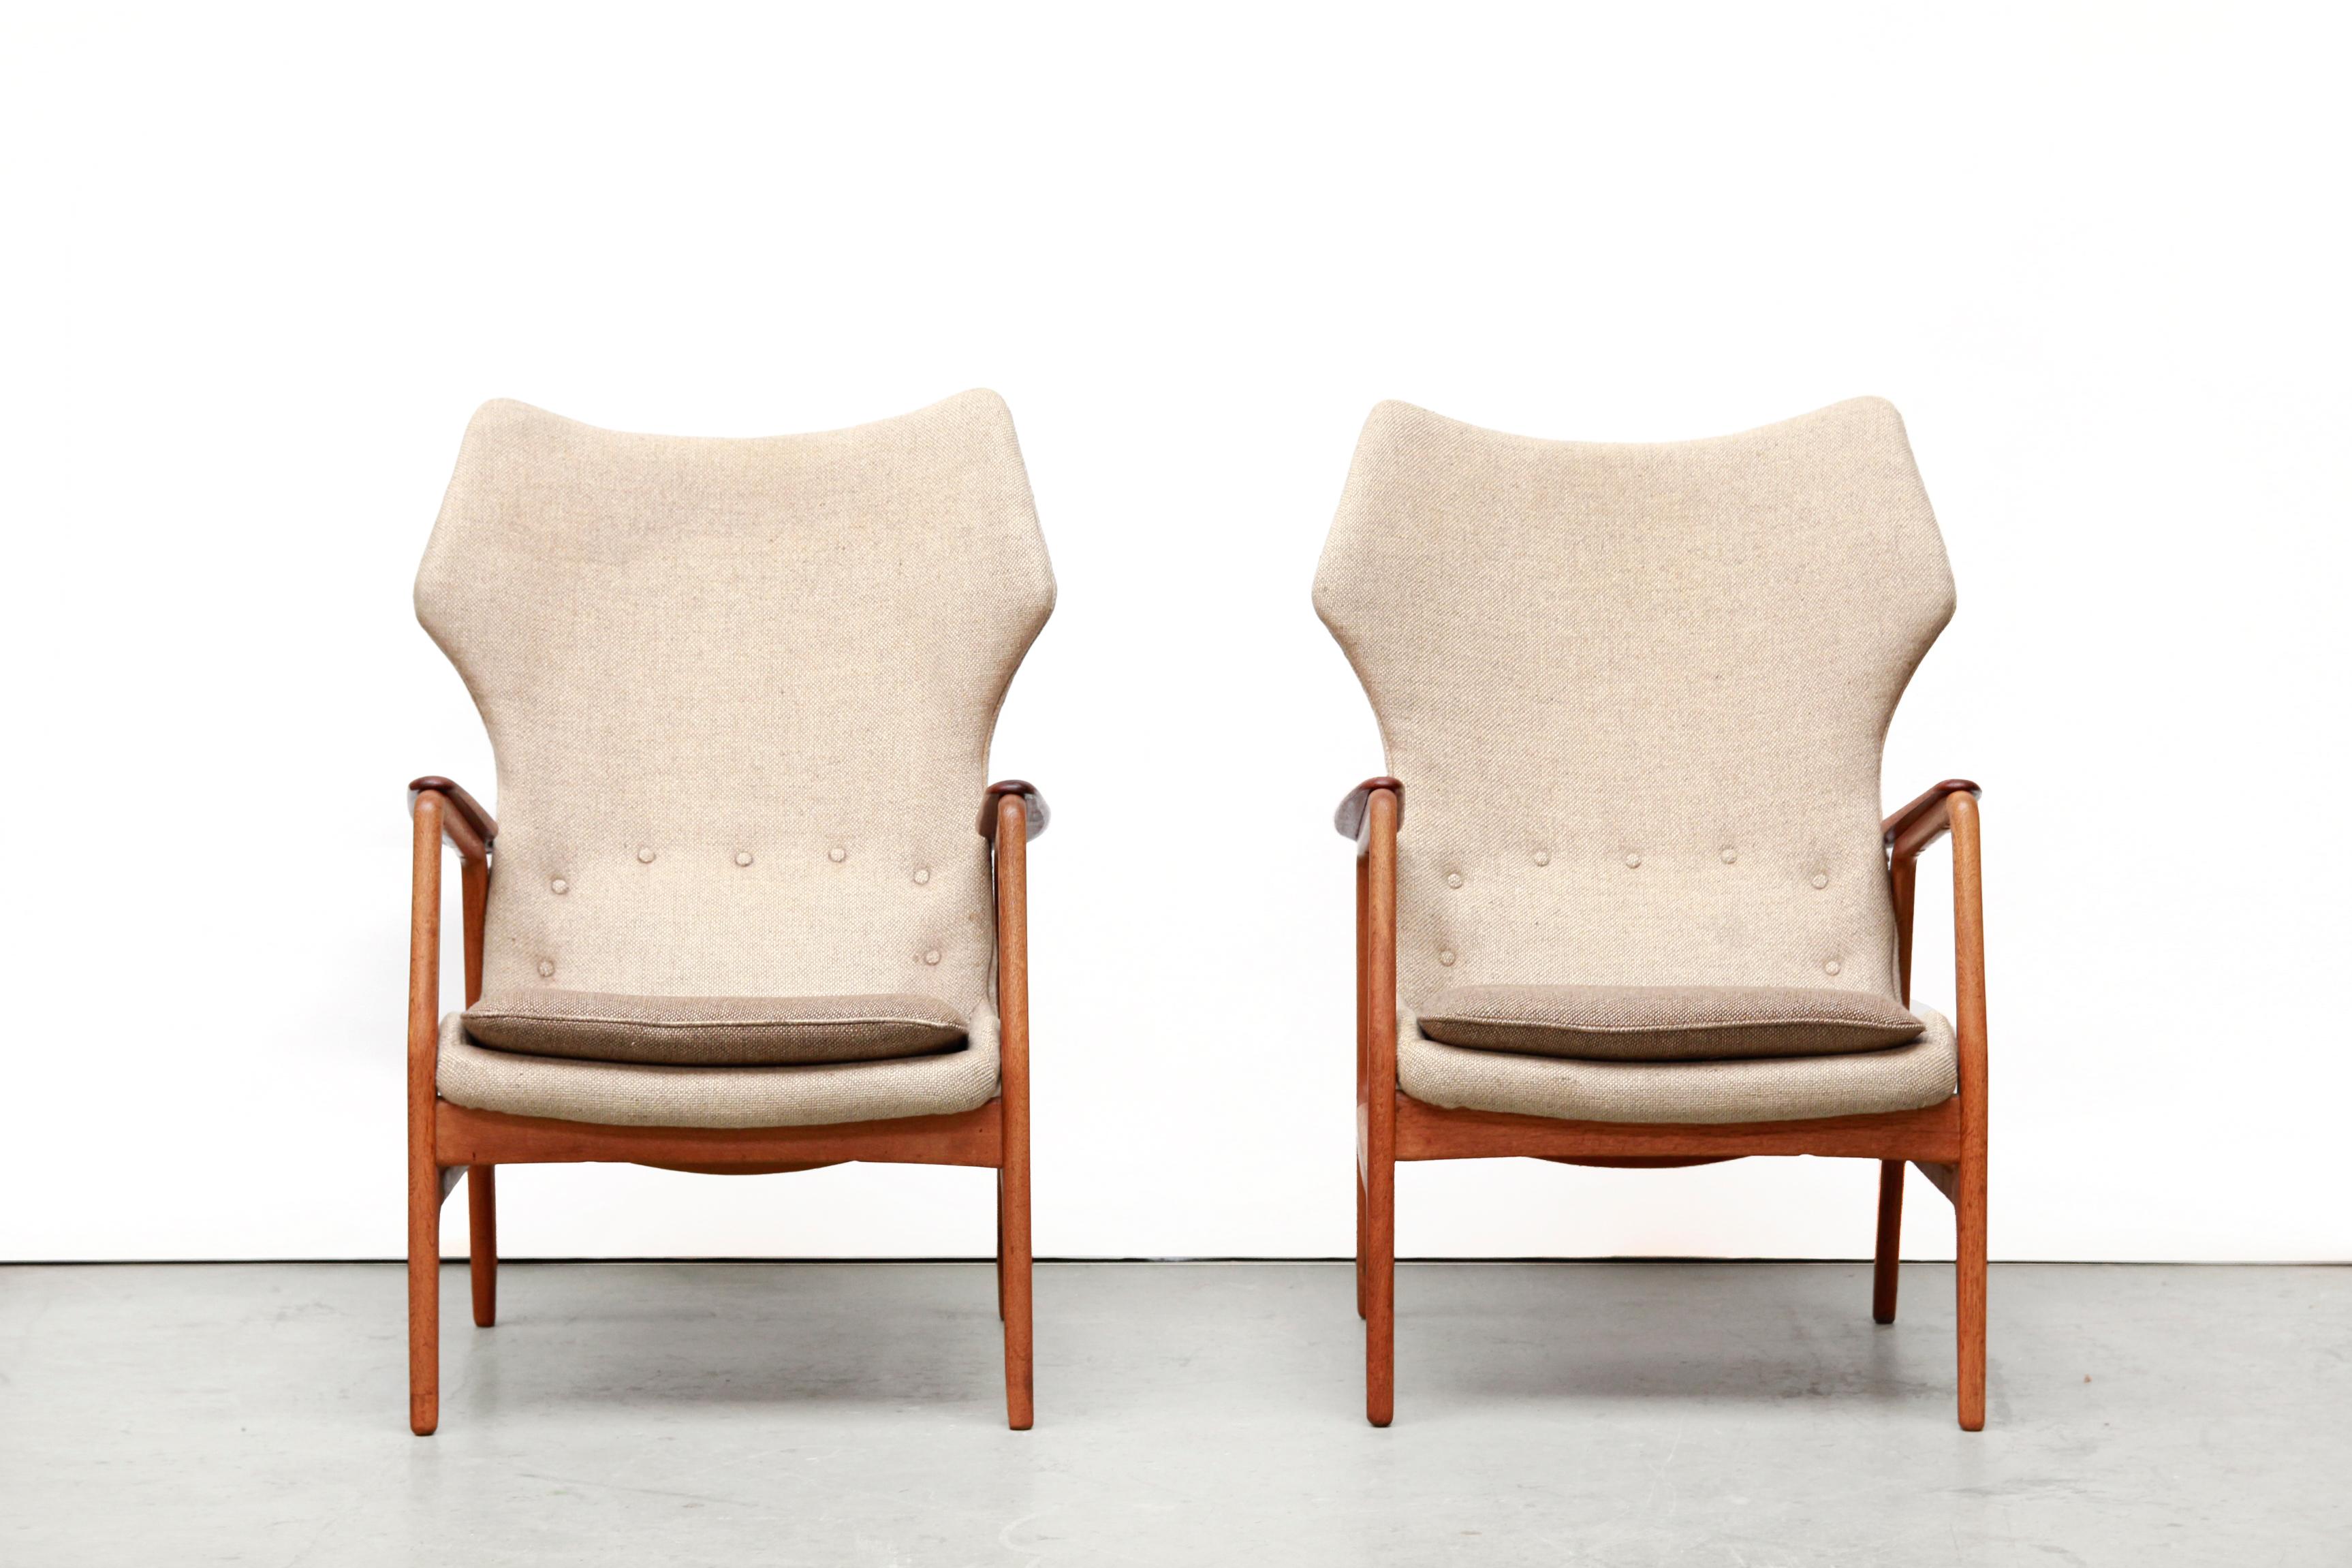 Very nice organic armchairs by Bovenkamp, Holland, 1950s. Bovenkamp furniture was worldwide known because of its quality furniture. Although Bovenkamp is a Dutch company, this armchair was designed by the Danish Aksel Bender Madsen. Bovenkamp was